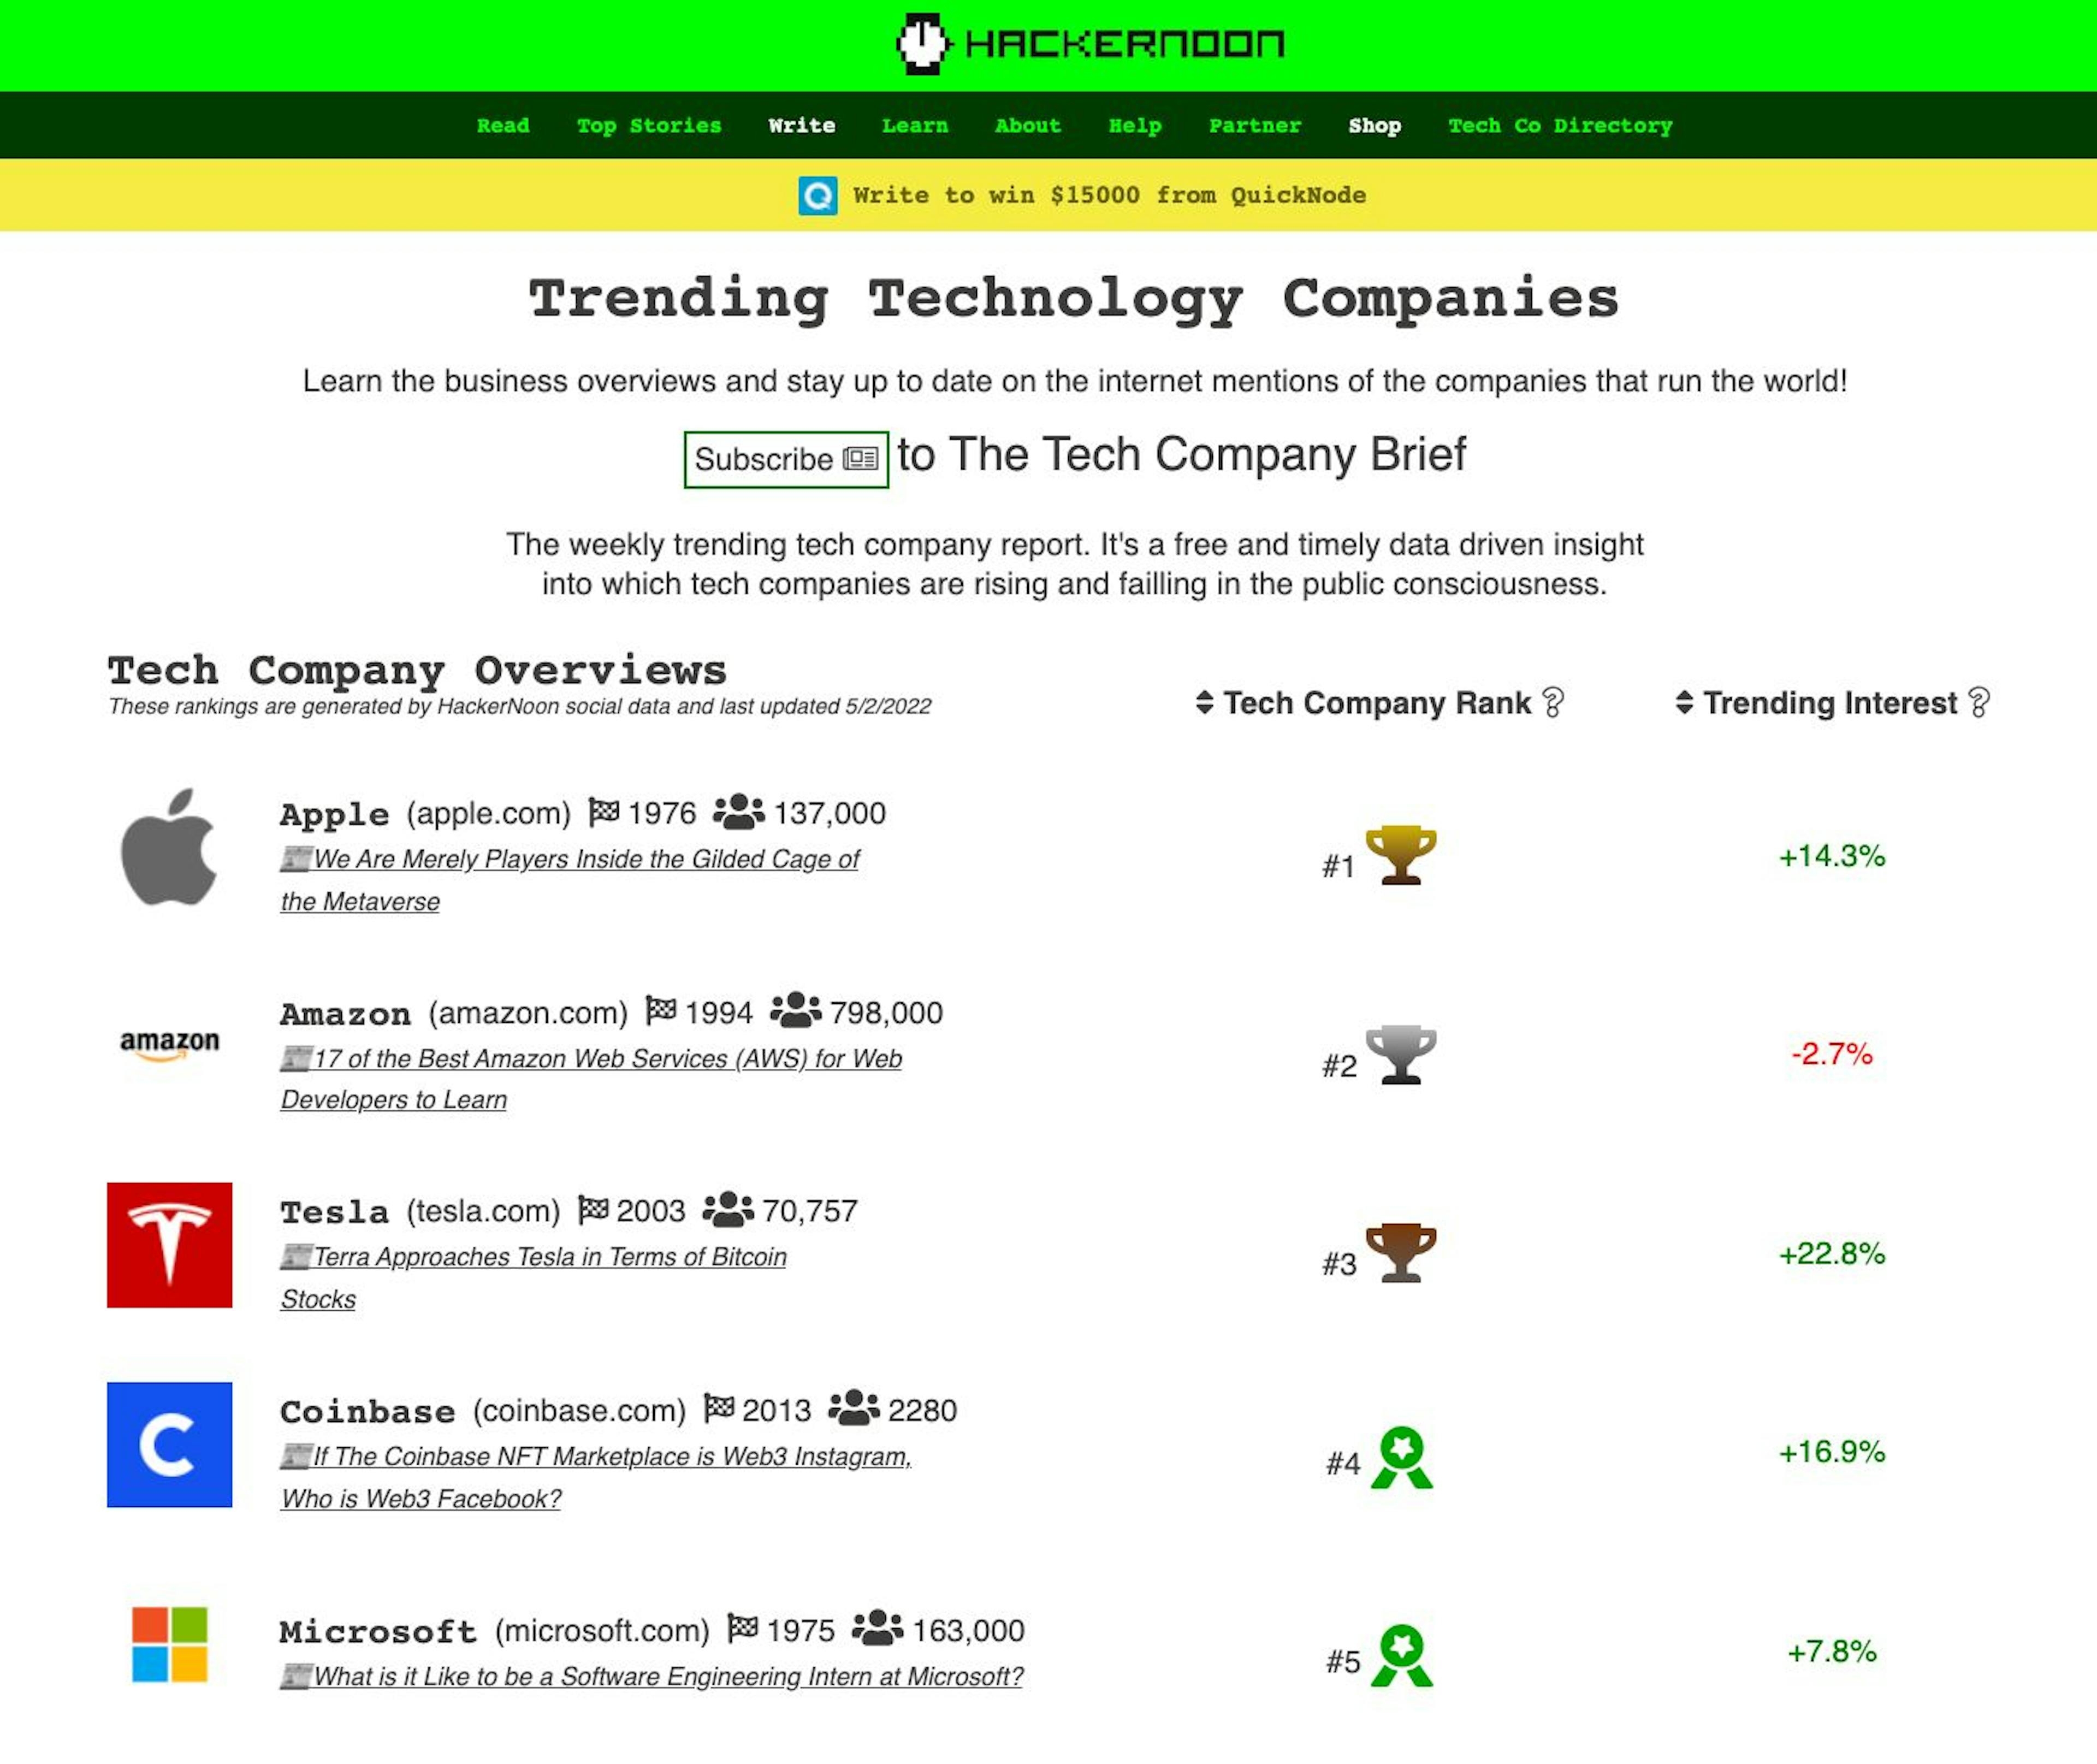 featured image - Apple Surpasses Amazon for Most Talked About Tech Company This Week